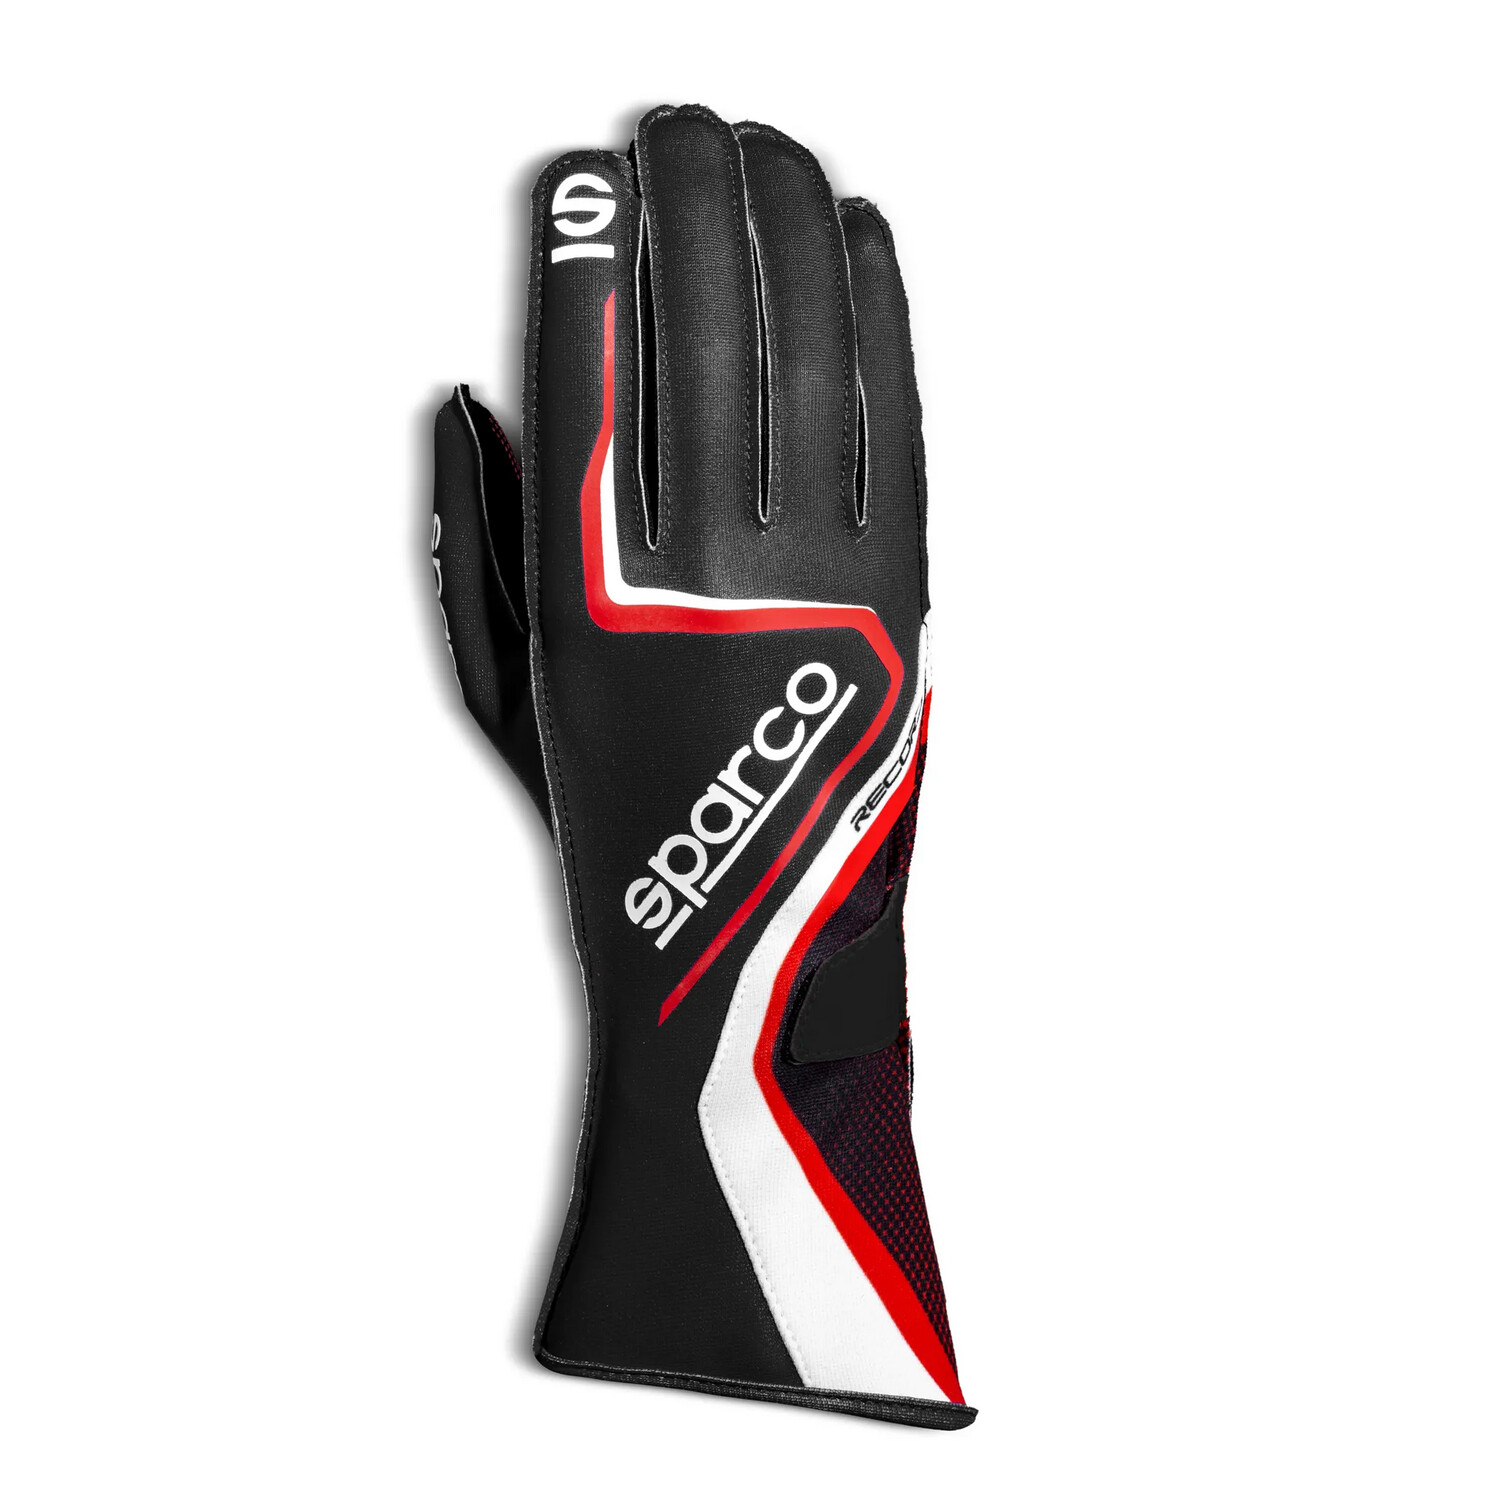 Sparco Record gloves